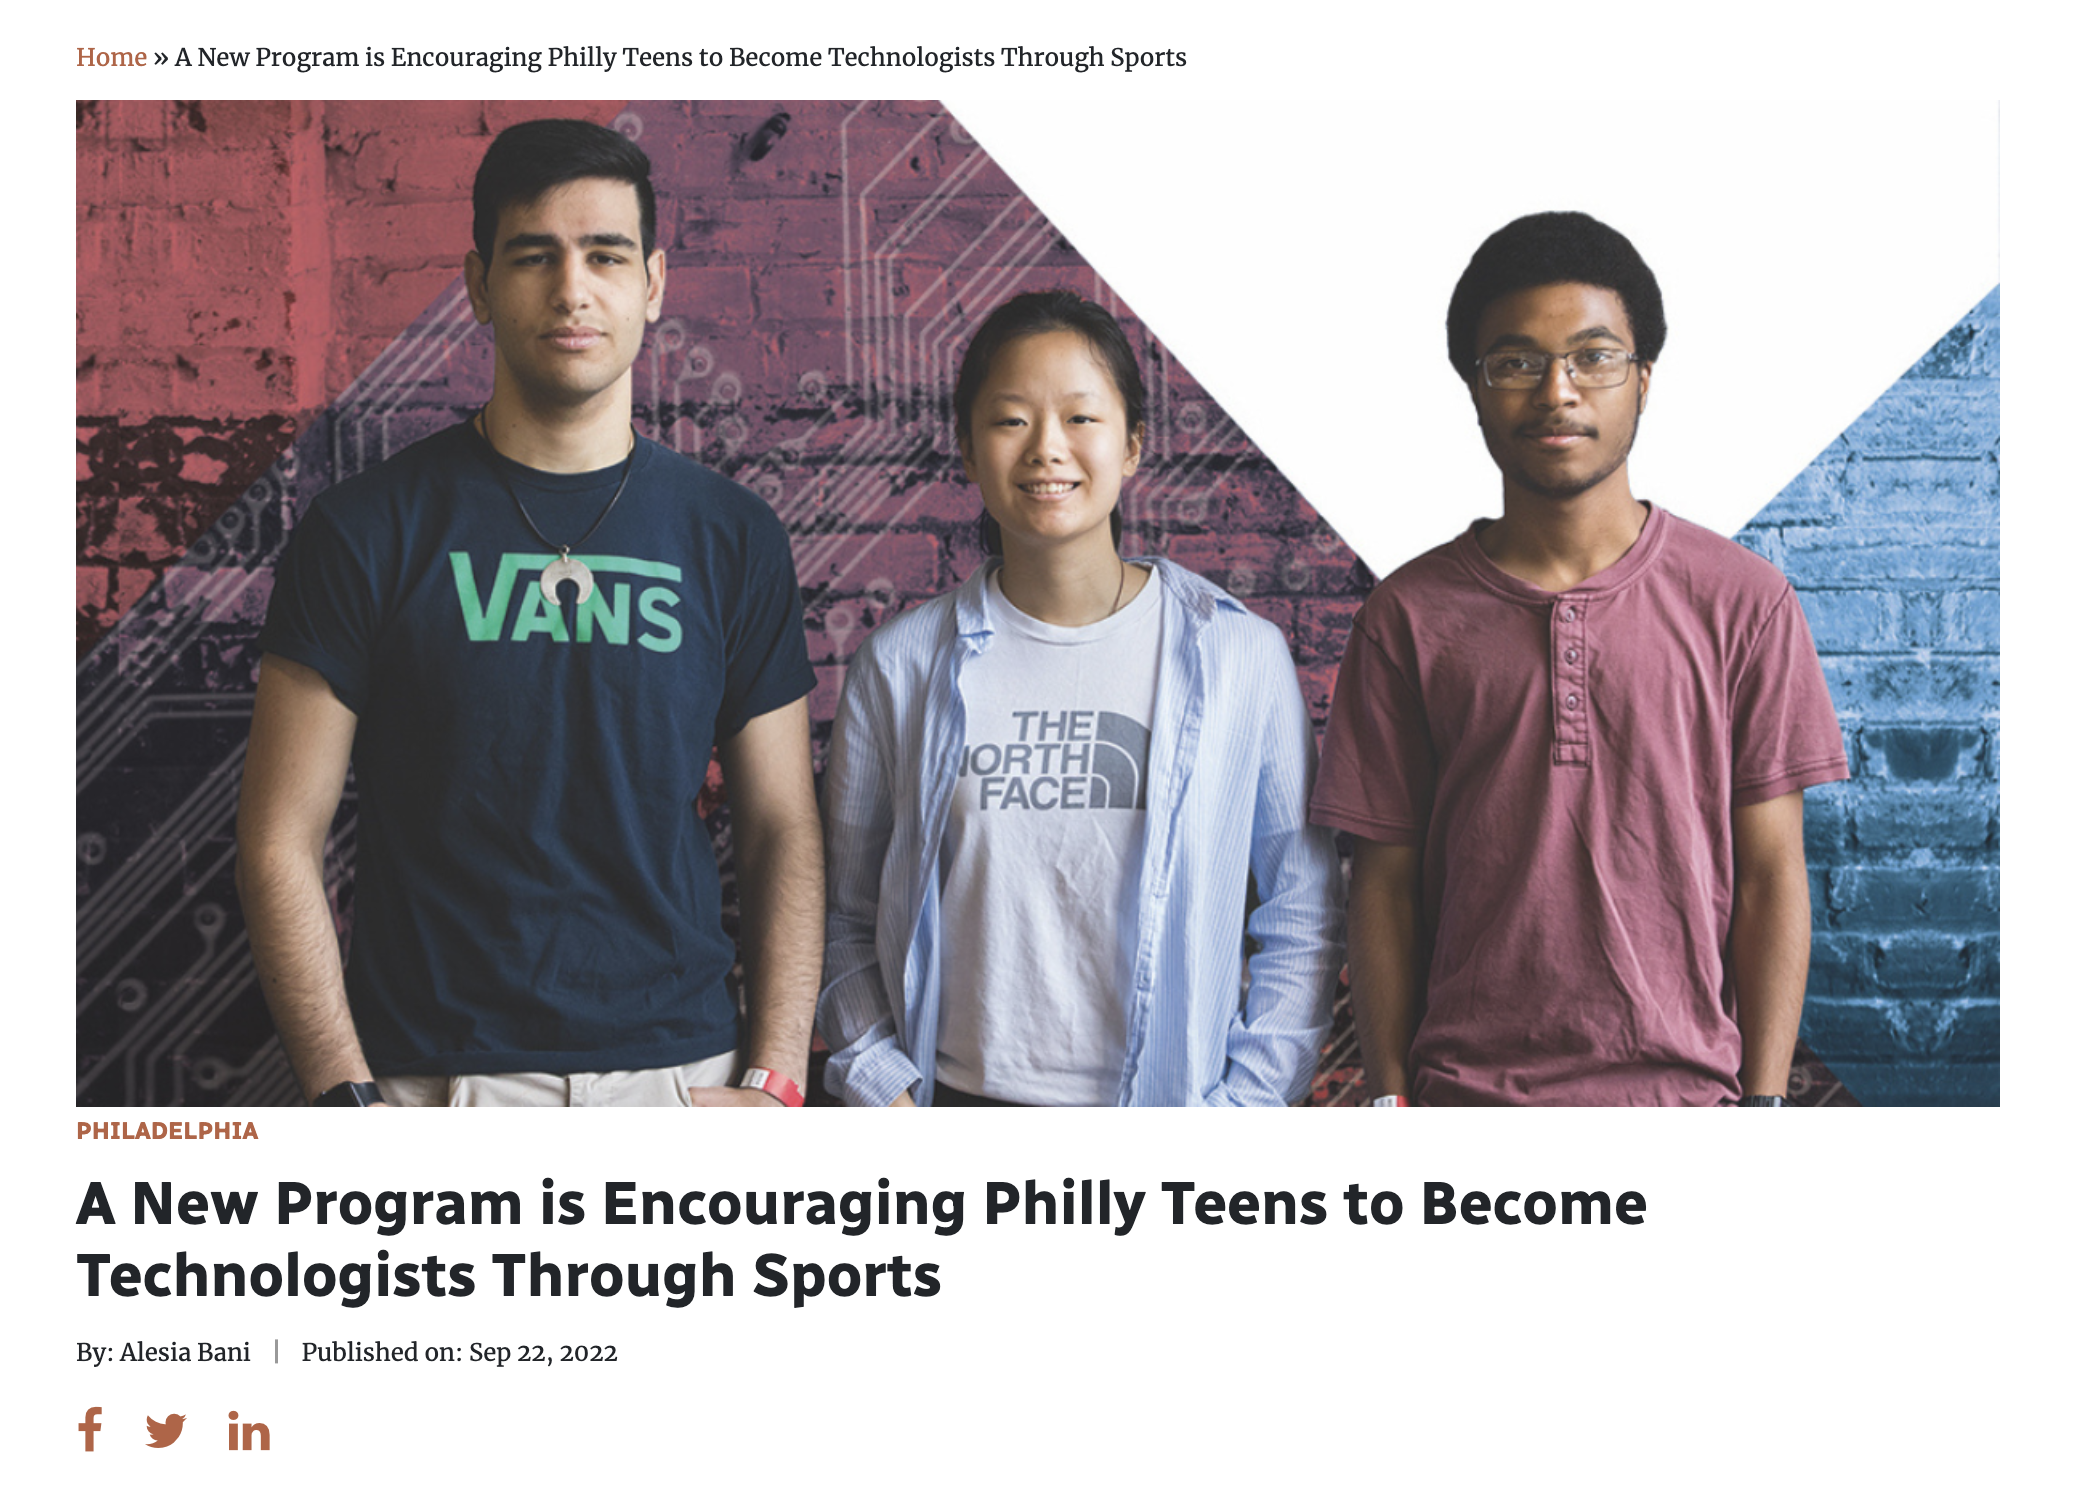 A New Program is Encouraging Philly Teens to Become Technologists Through Sports